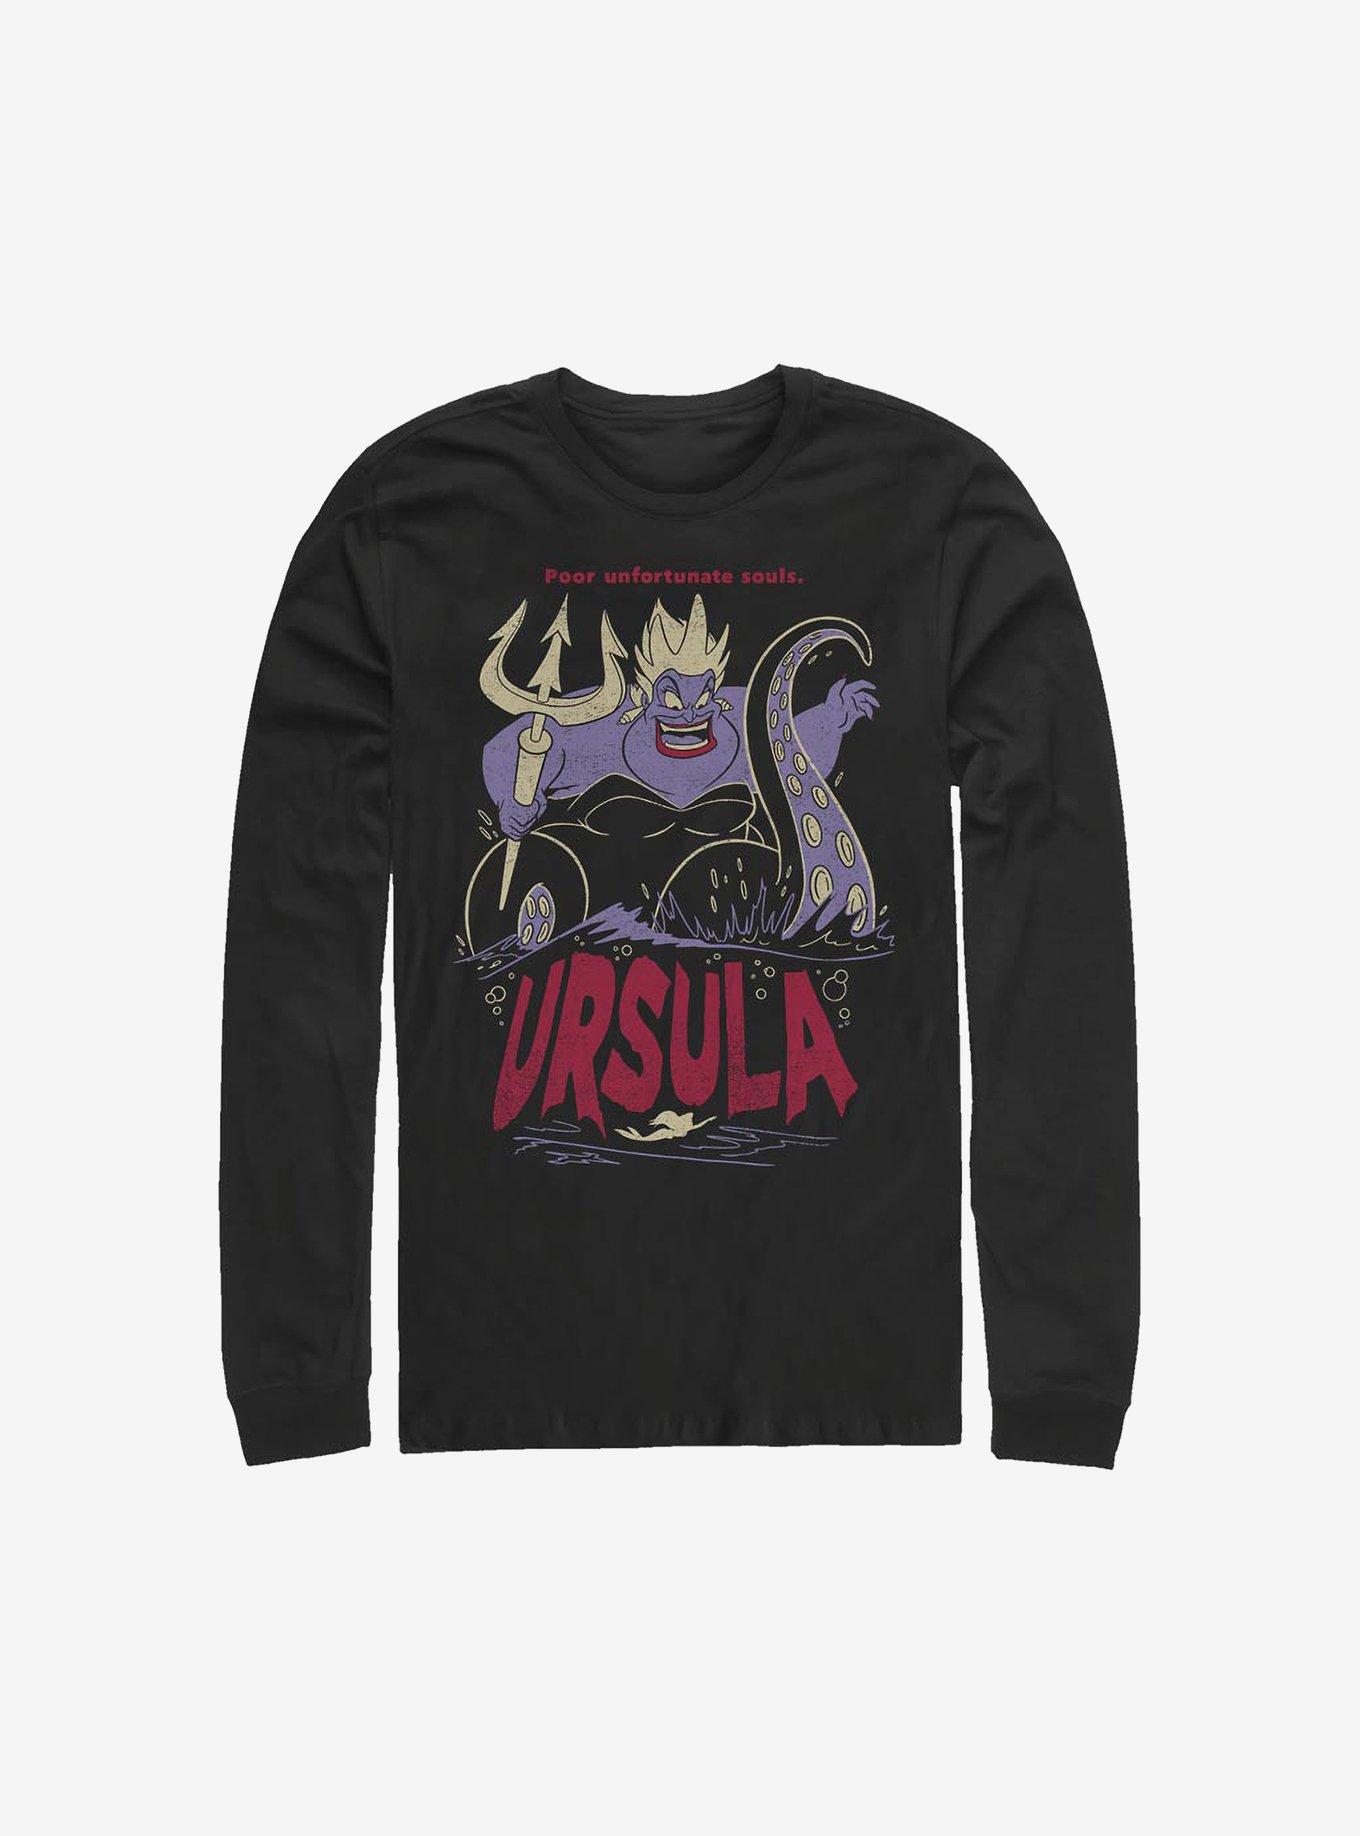 Disney The Little Mermaid Ursula The Sea Witch Long-Sleeve T-Shirt, BLACK, hi-res